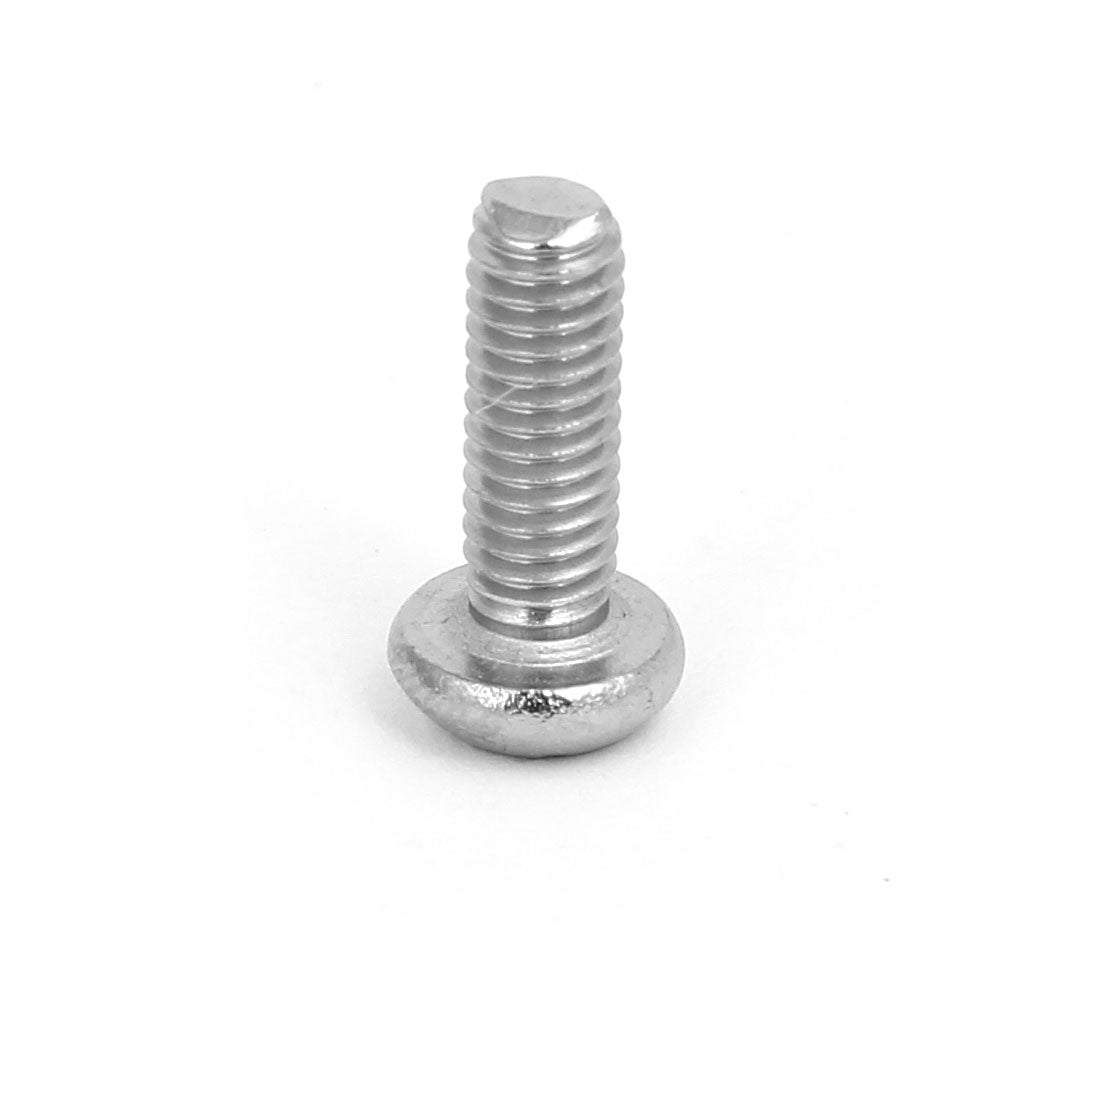 uxcell Uxcell M4x12mm 304 Stainless Steel Button Head Torx Security Tamper Proof Screws 50pcs